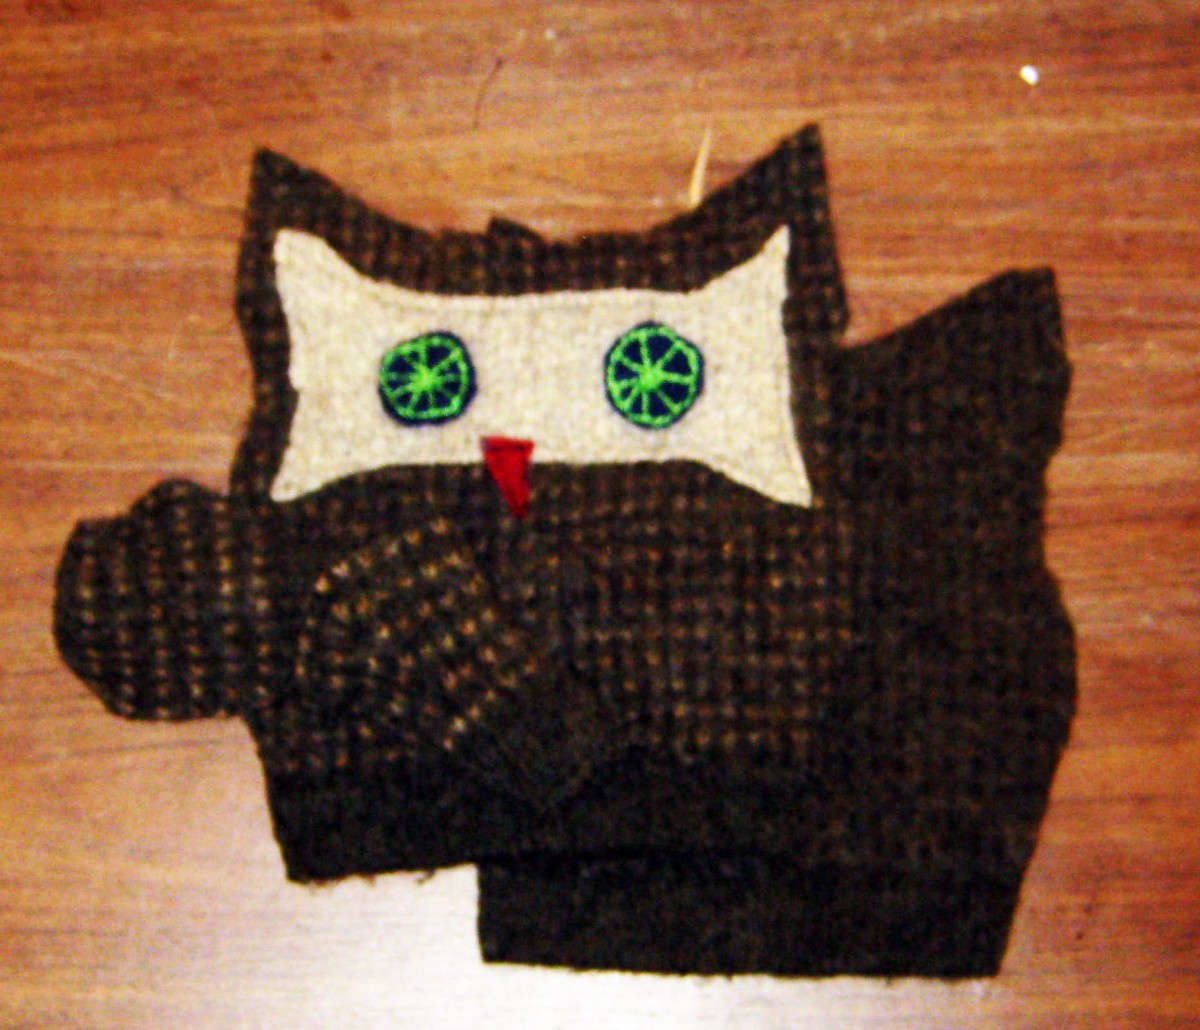 Make a Felted Wool Stuffed Owl From an Old Sweater - HubPages